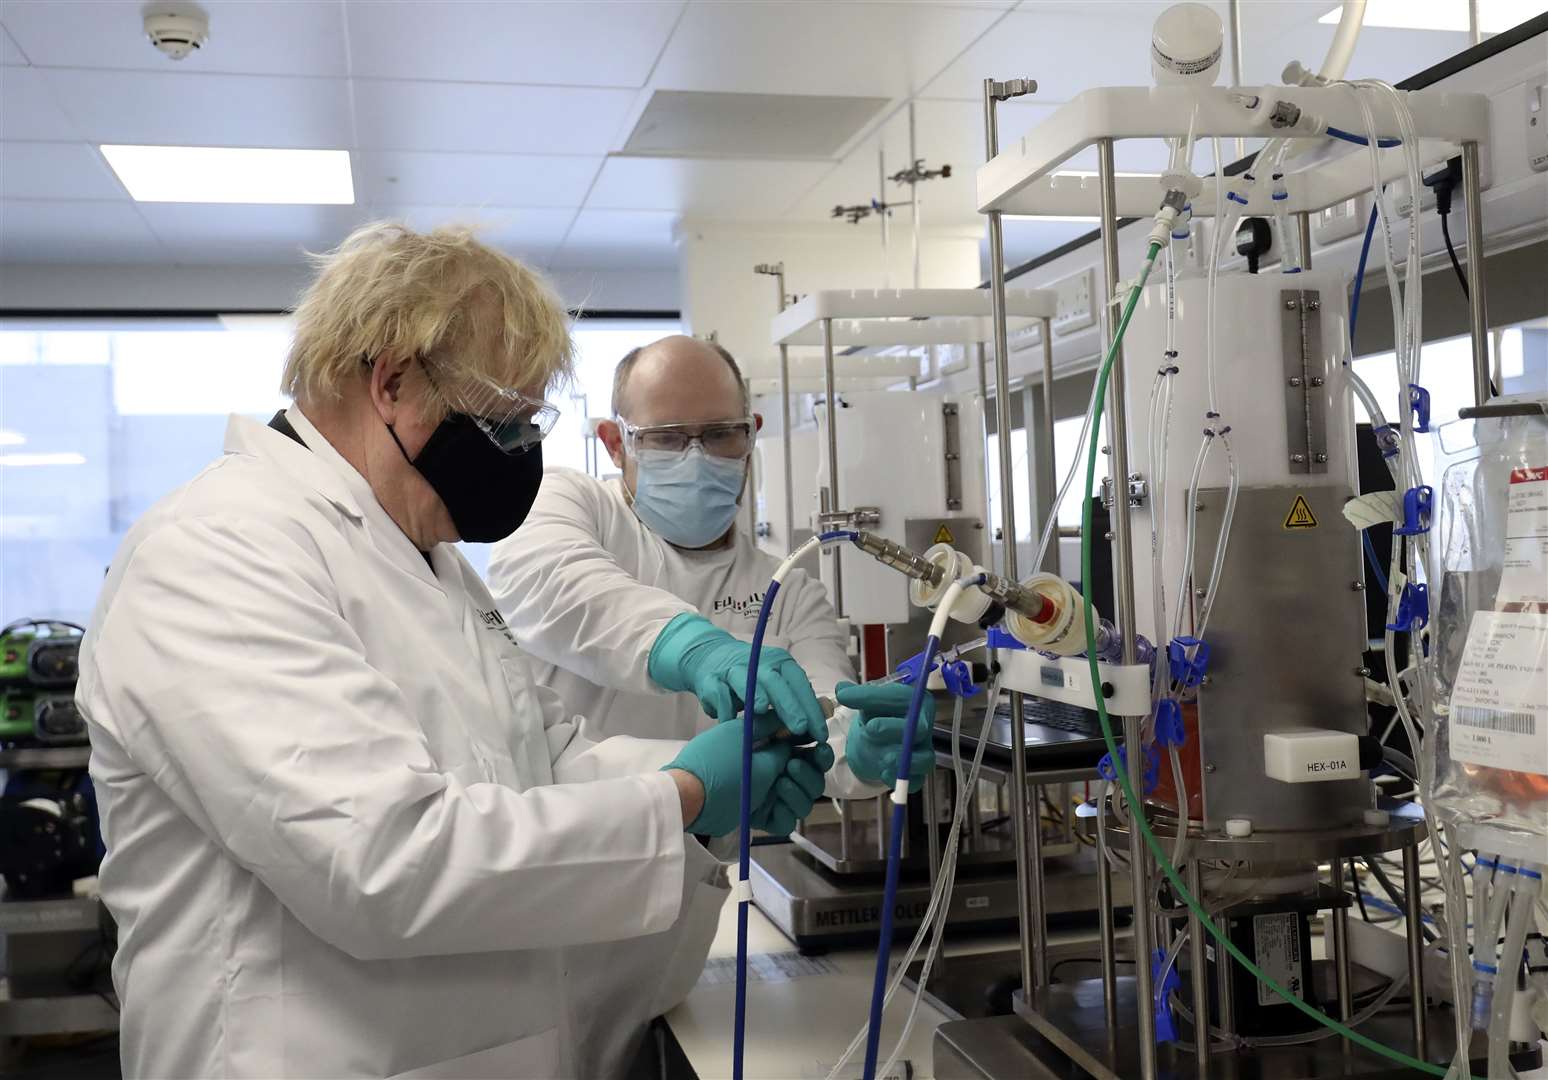 Boris Johnson during a visit to the Fujifilm Diosynth Biotechnologies plant in Teesside (Scott Heppell/PA)